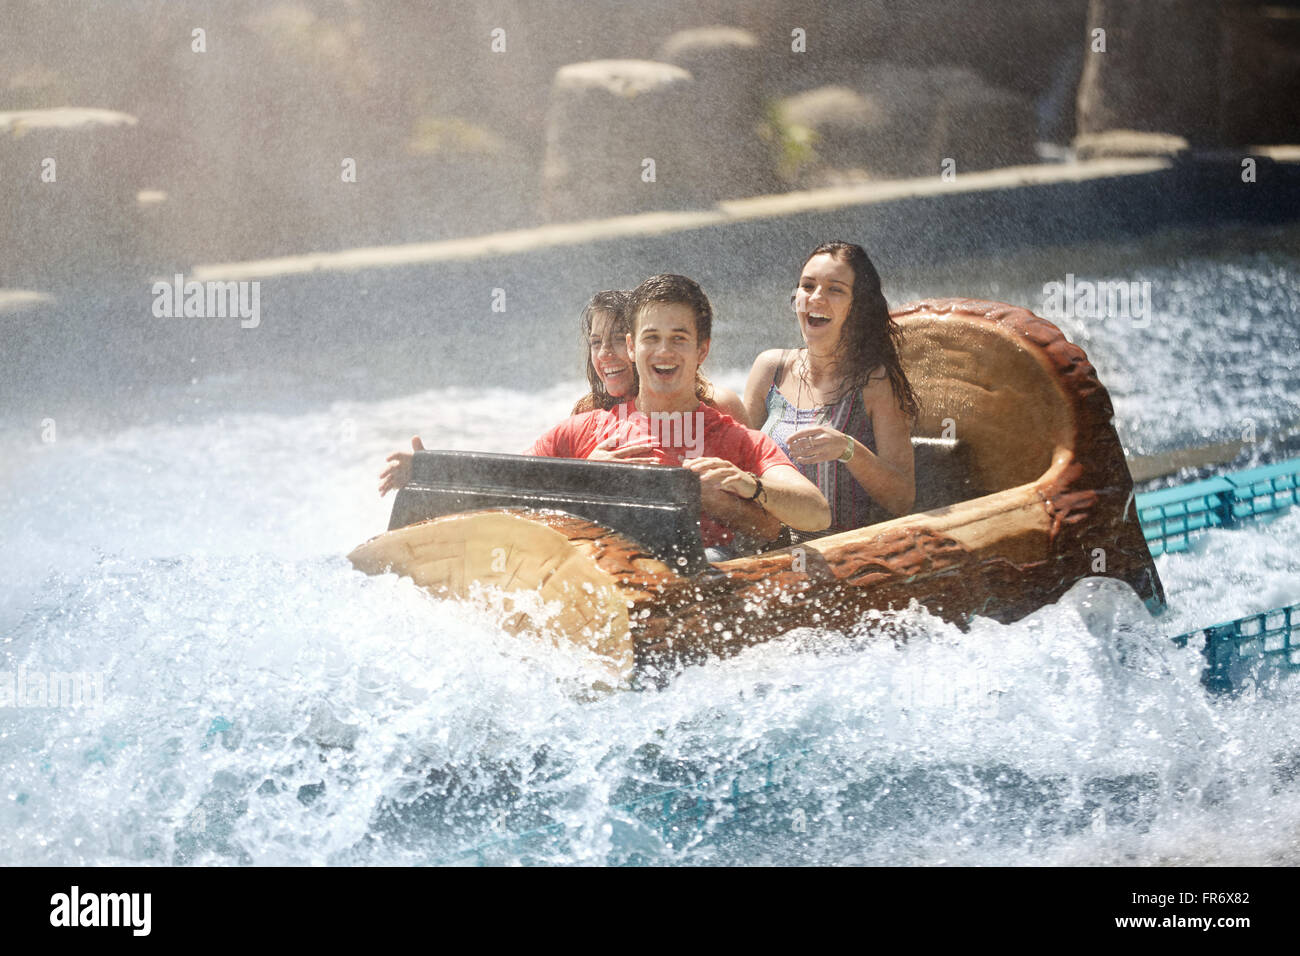 Wet friends laughing on water log amusement park ride Stock Photo